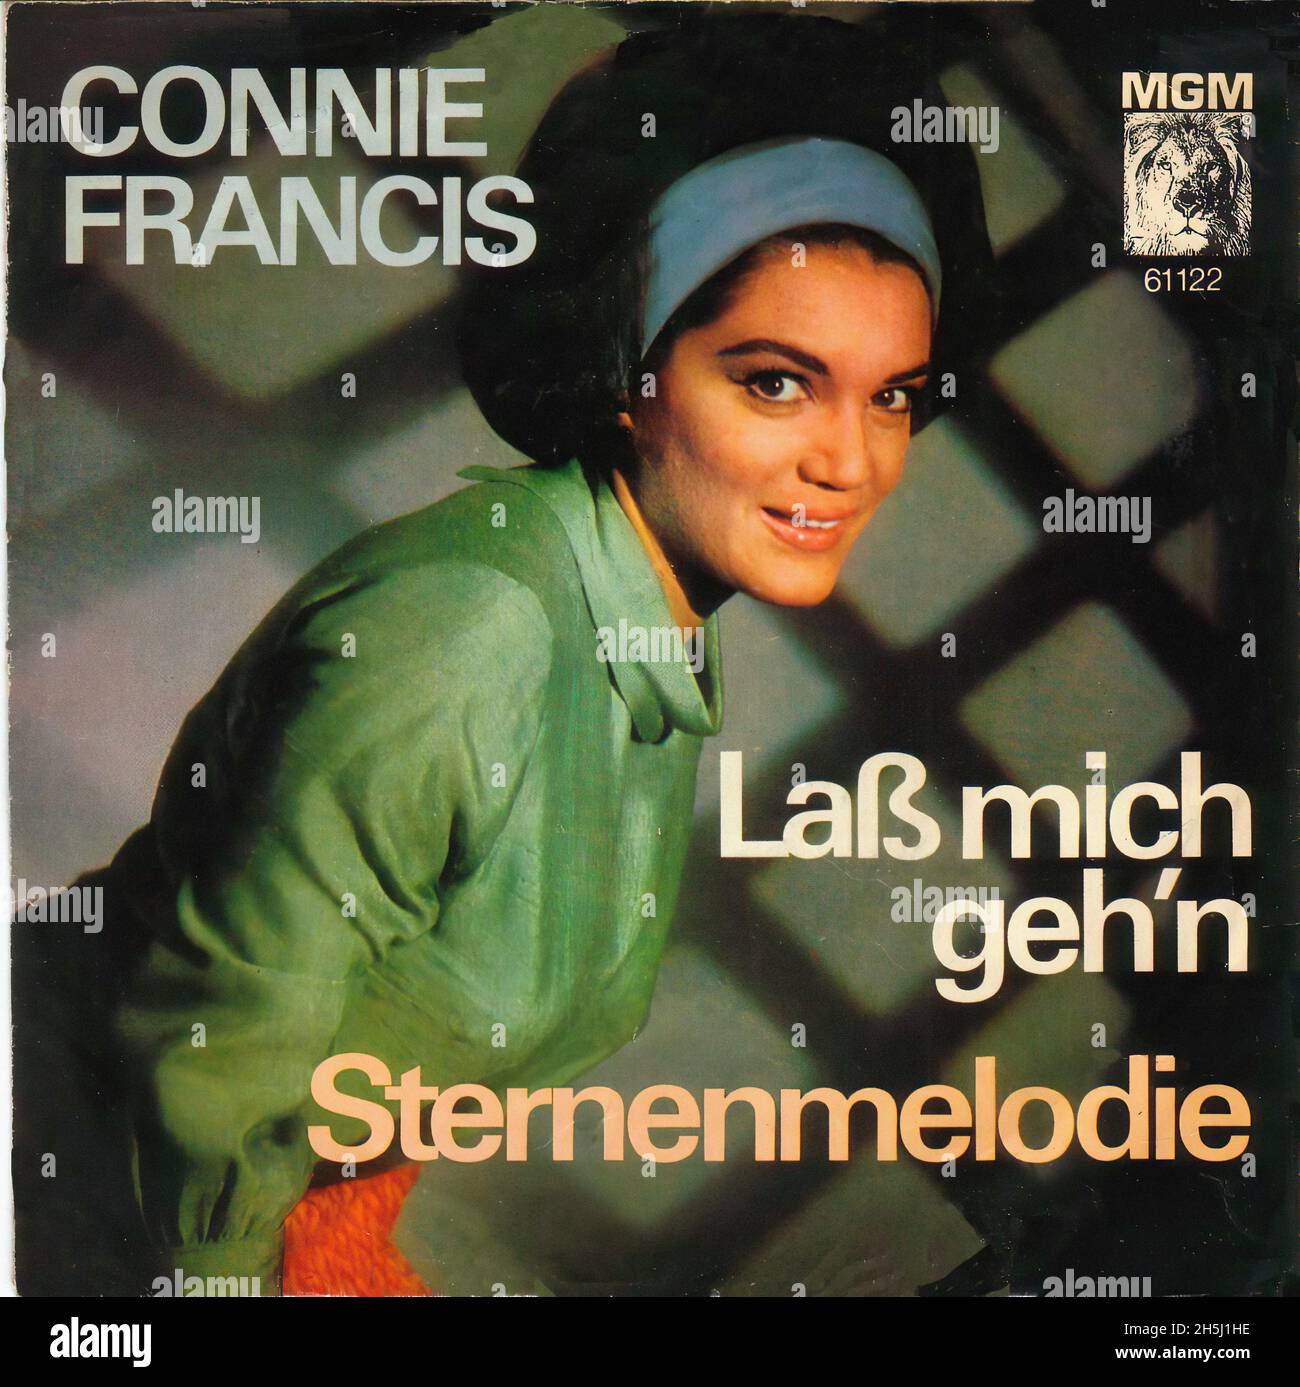 Vintage Single Record Cover - Francis, Connie- Lass mich geh n-1966 Stockfoto